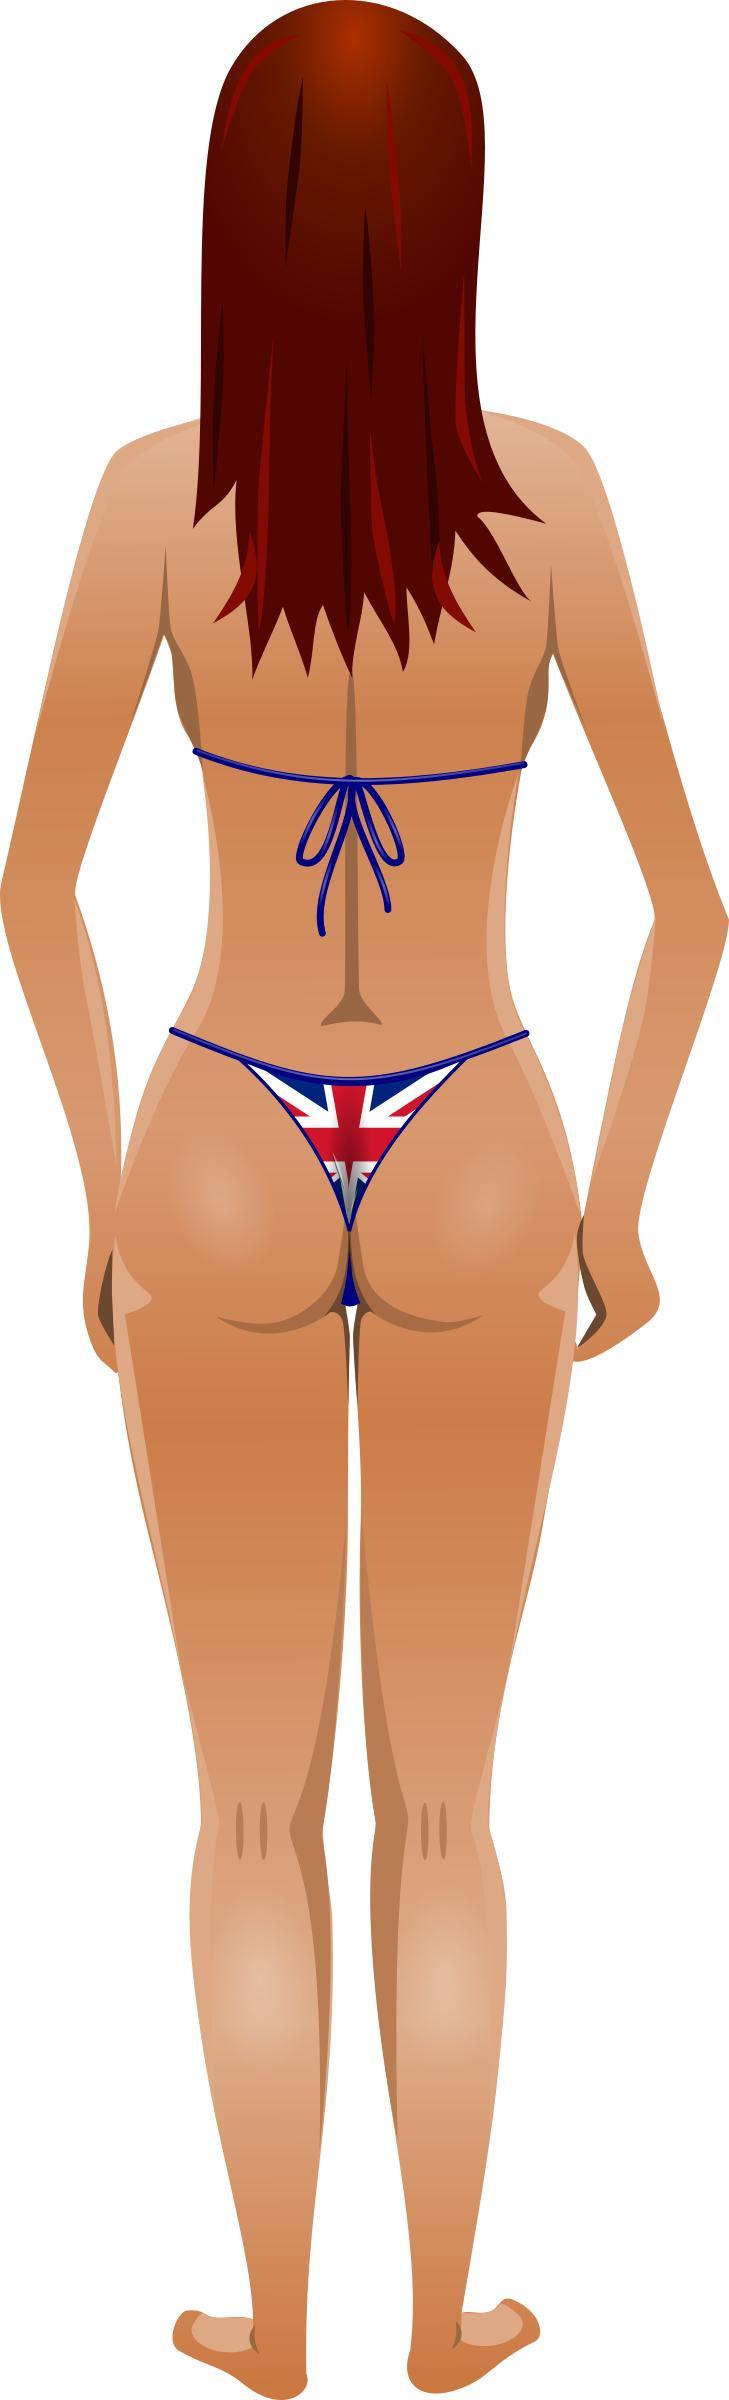 Young lady (light skin, flag bikini, red hair) png transparent